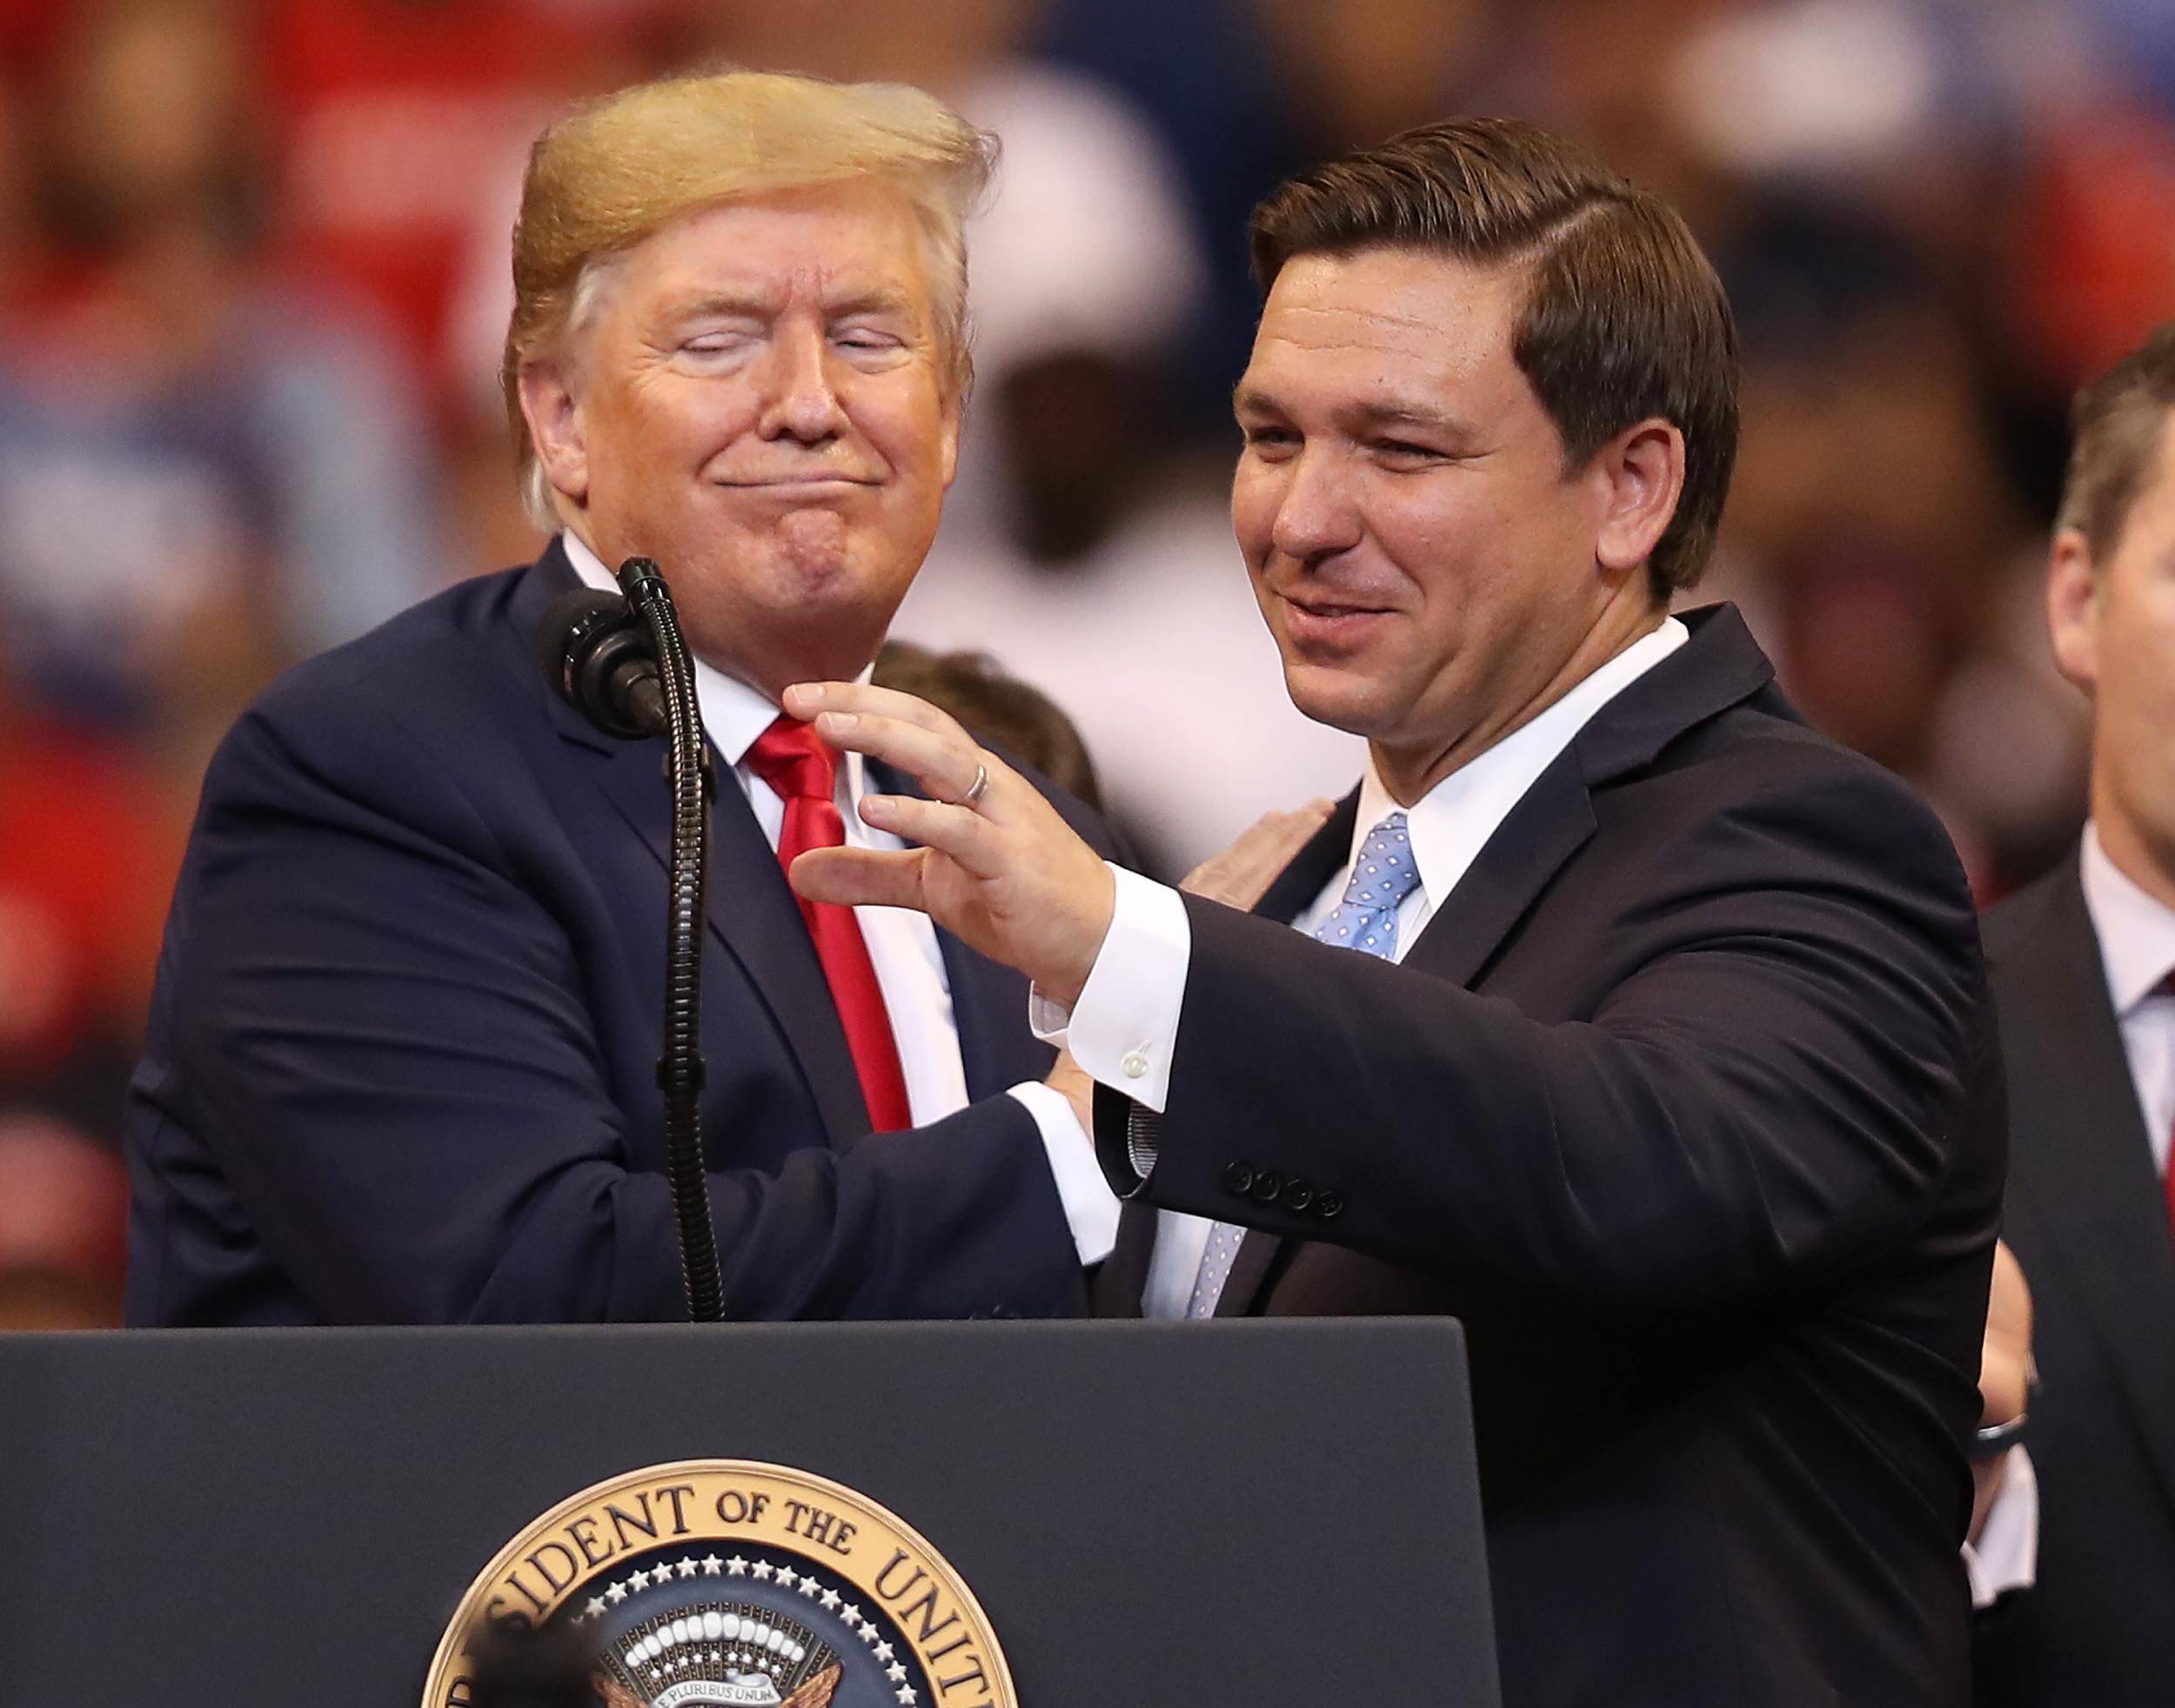 DeSantis and Trump at a rally in Sunrise, Florida, in November